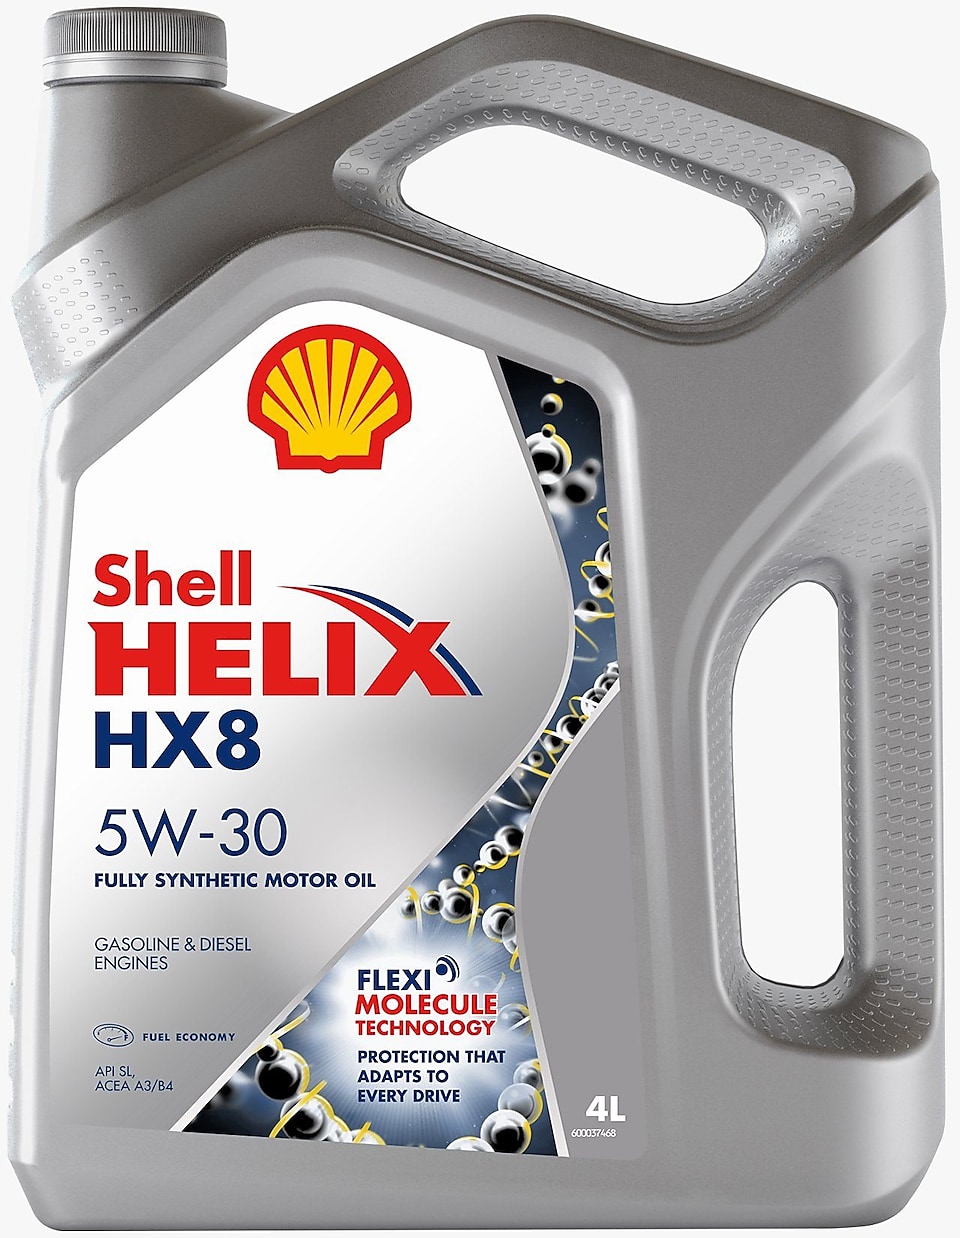 Моторное масло Shell Helix HX8 Synthetic 5W-30 4л